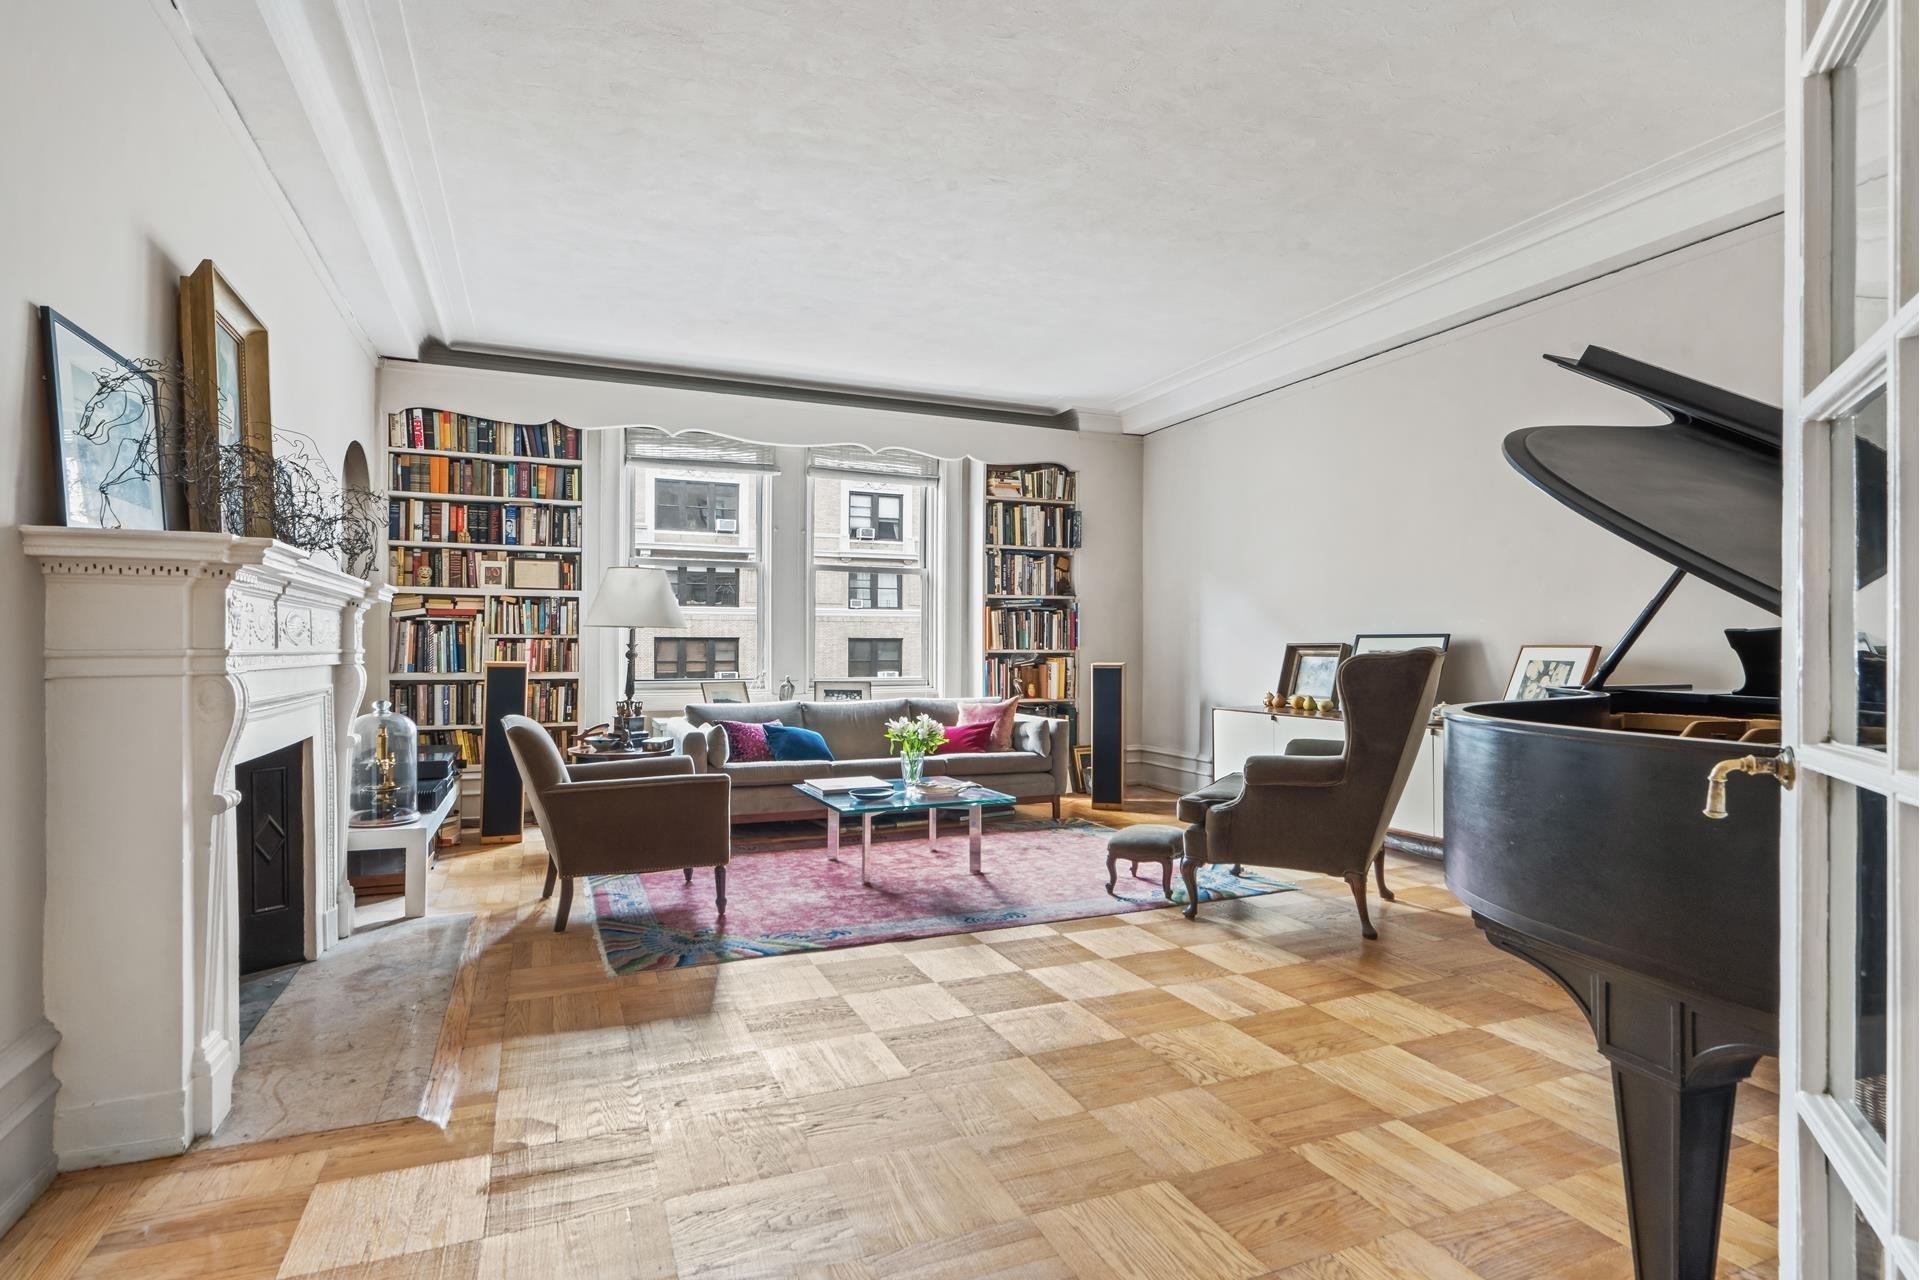 Co-op Properties for Sale at 151 W 86TH ST, 9C Upper West Side, New York, New York 10024